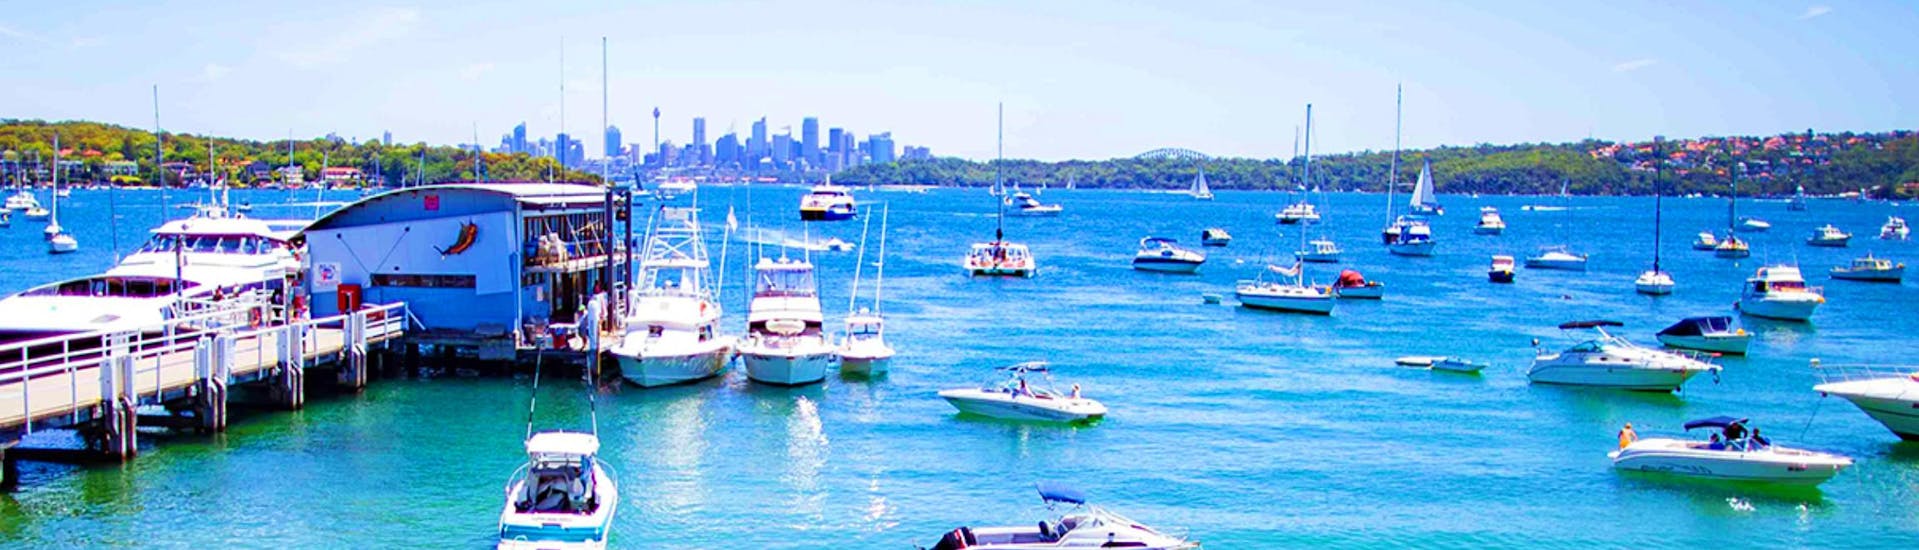 private-sydney-boat-tour-with-beach-picnic-sydney-harbour-boat-tours